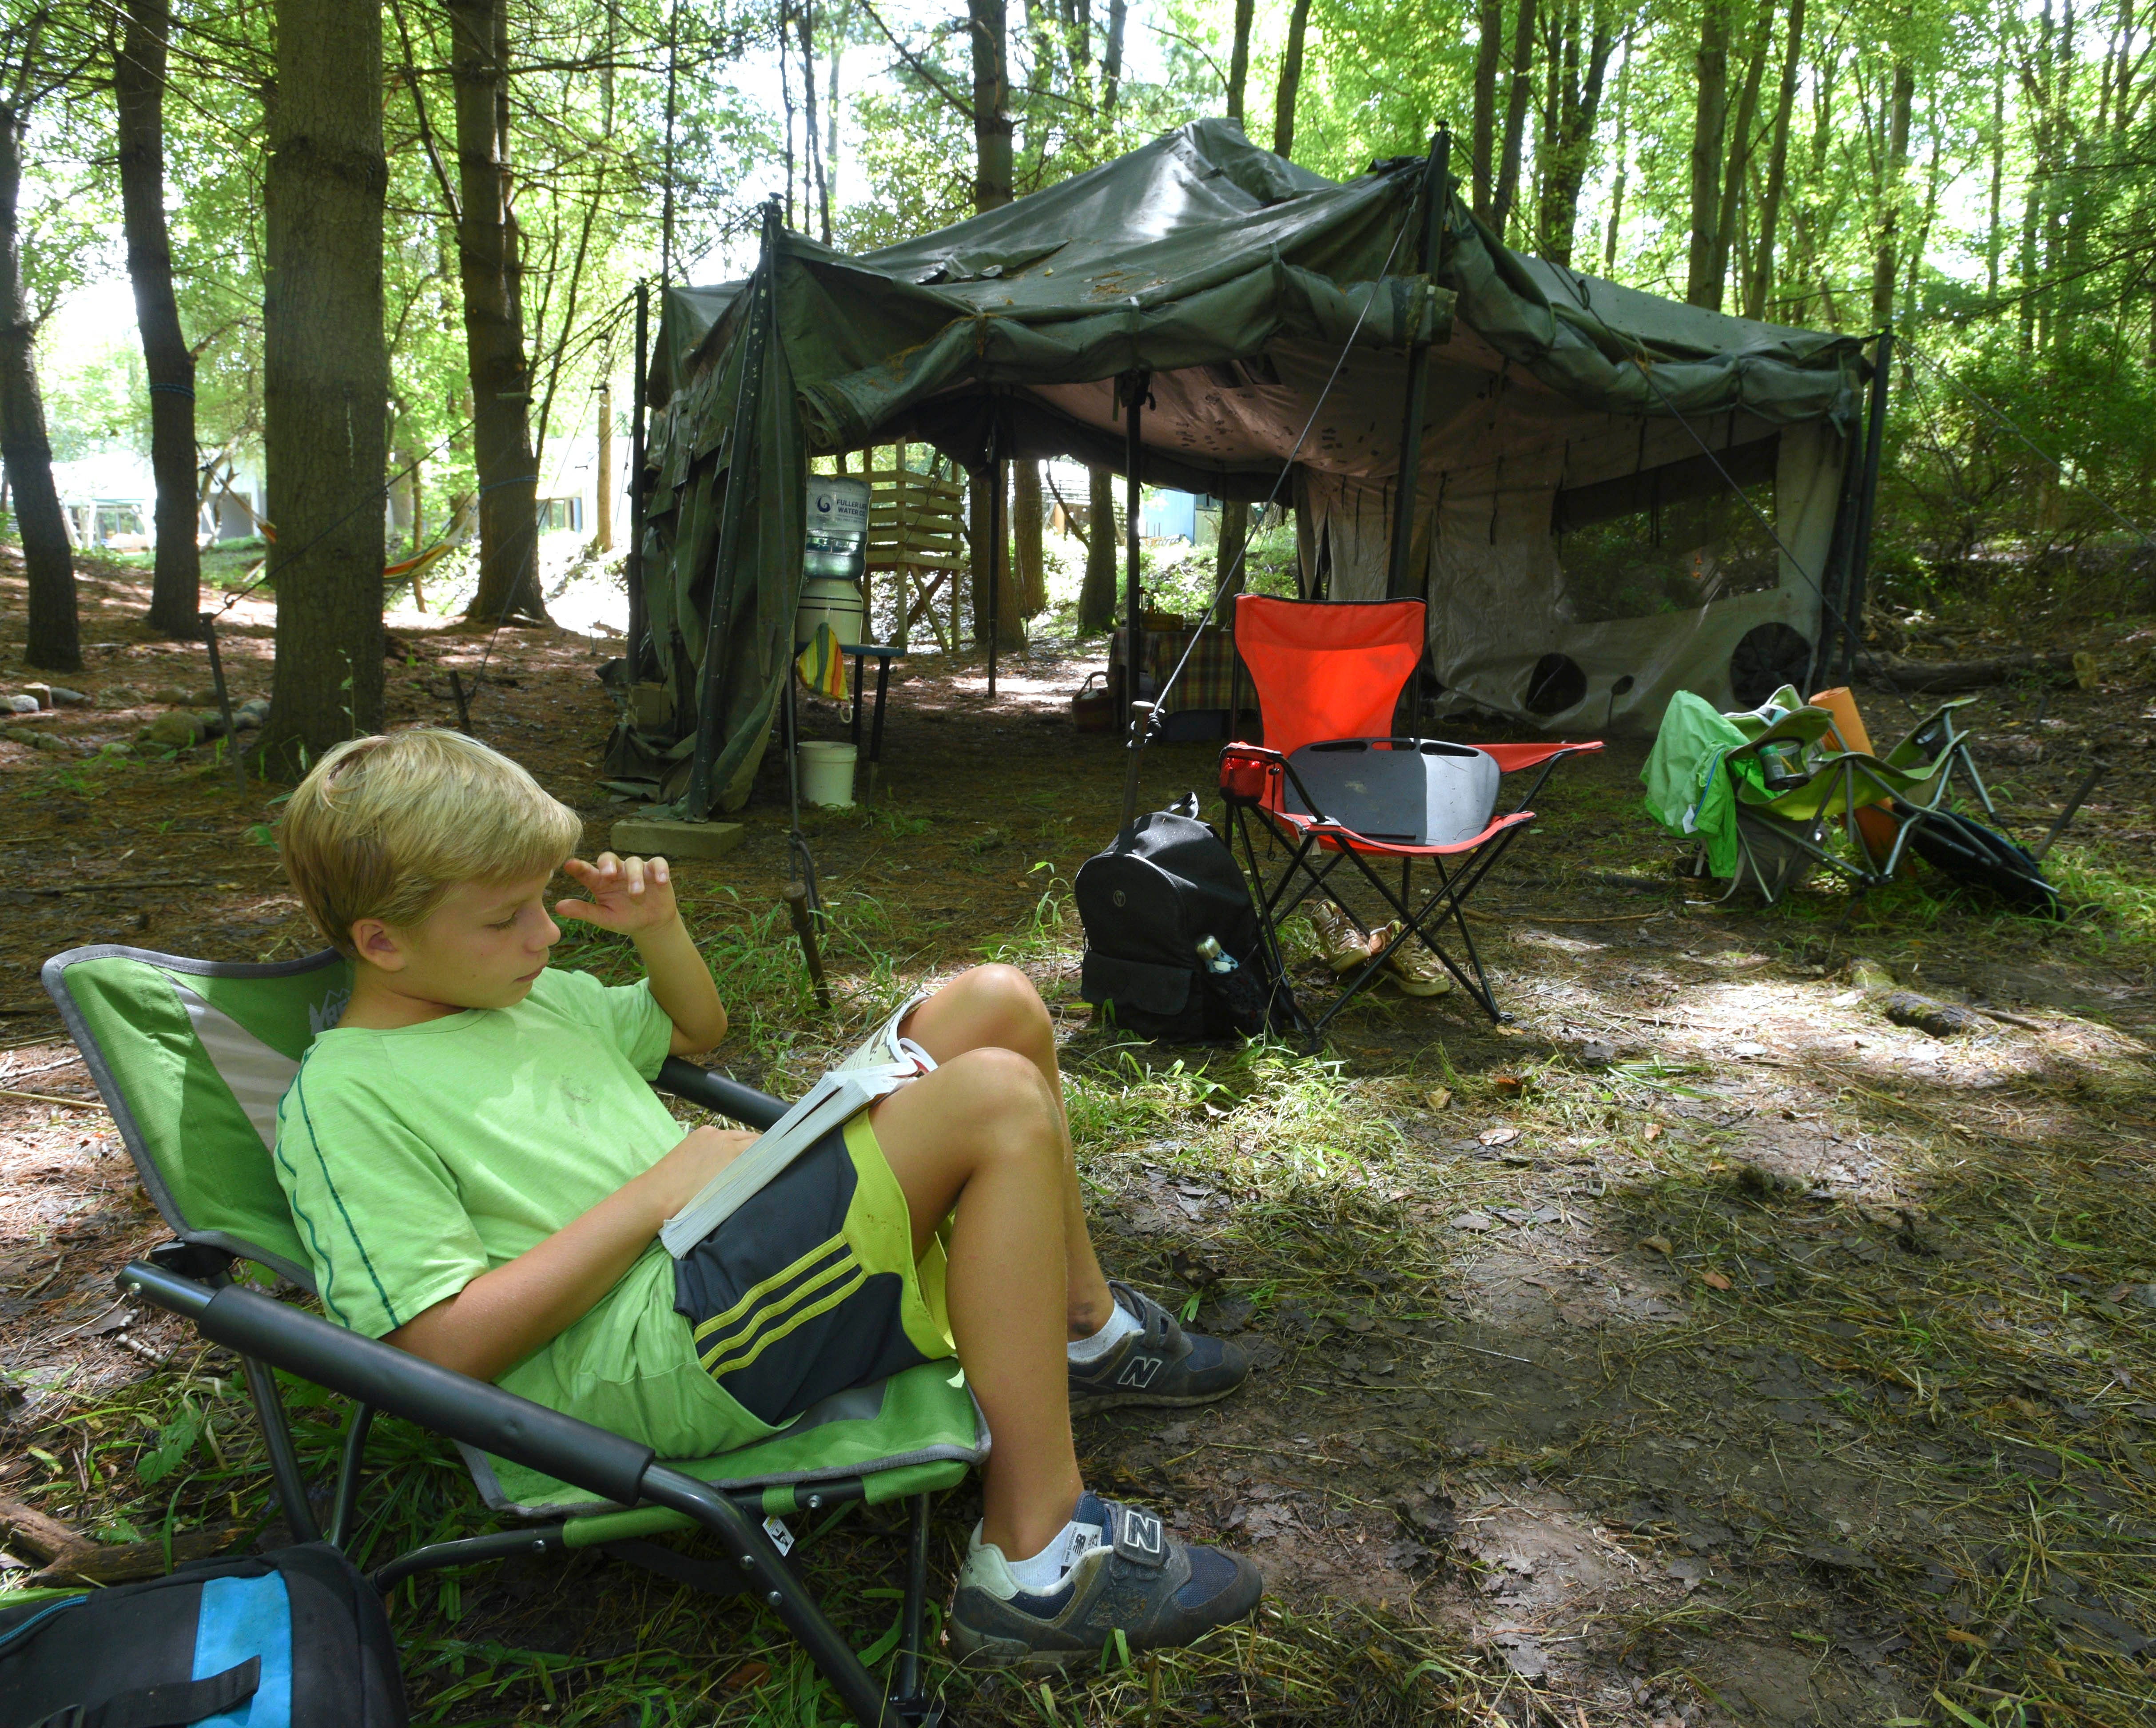 Alik Sifford, 11, of Shelby Twp., reads a book in front of an Army tent in The Holler, an outdoor classroom.